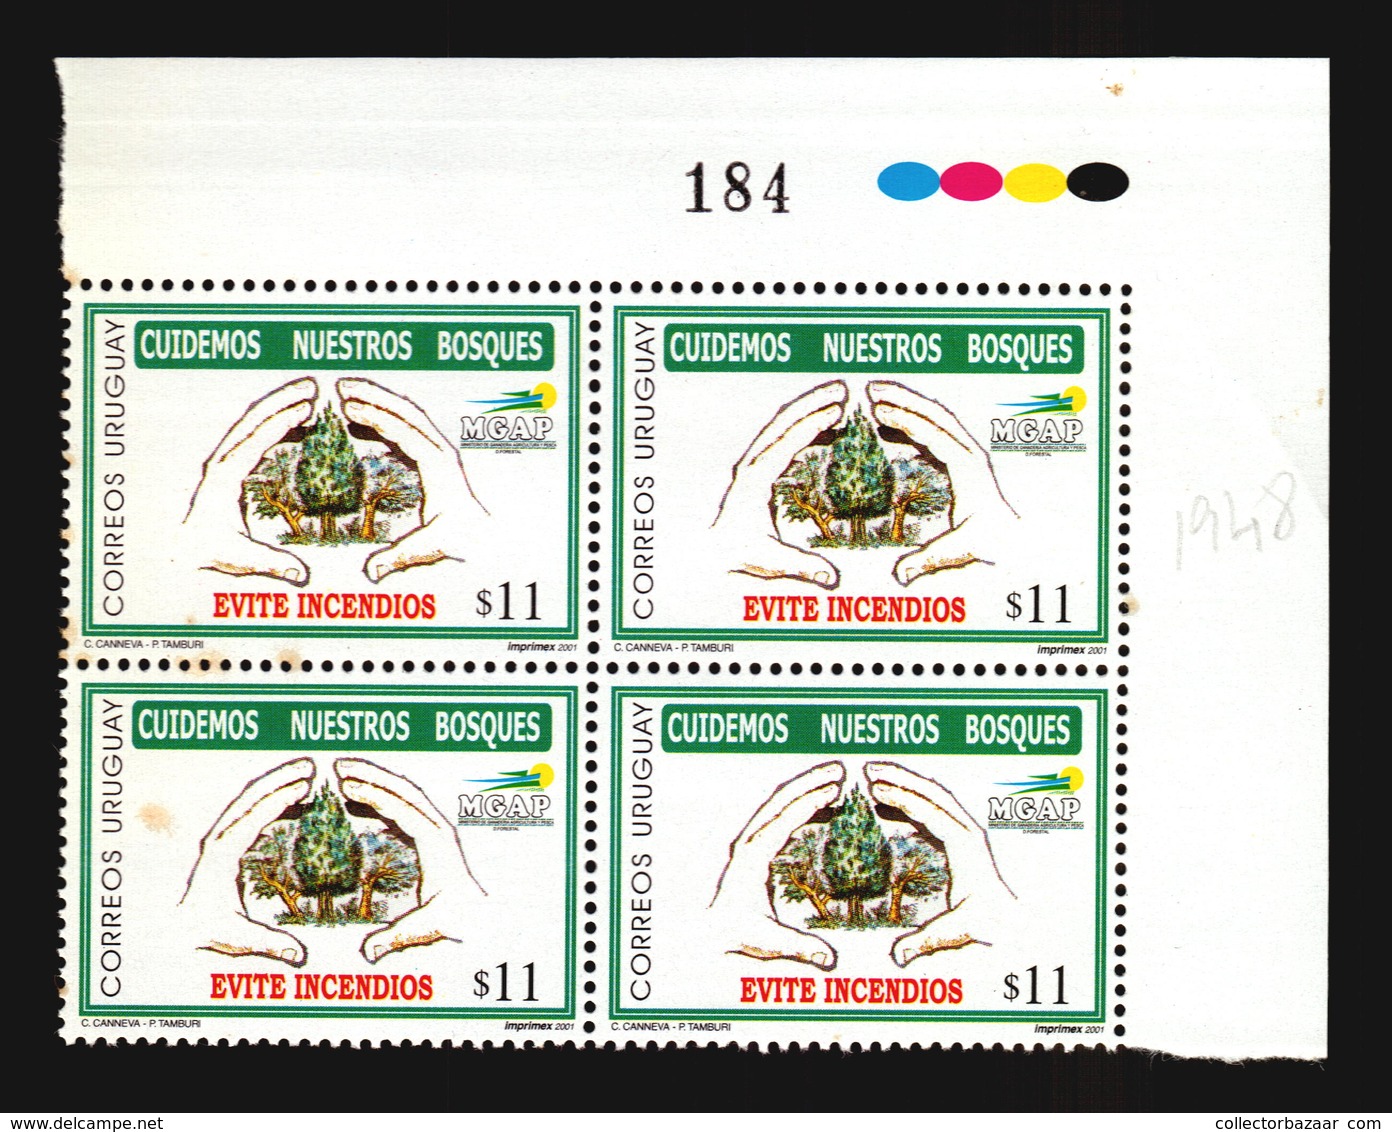 FOREST TREE CARE FIRE DISASTERS URUGUAY MNH BLOCK OF 4 ** CATALOGUE VALUE $12 - Trees